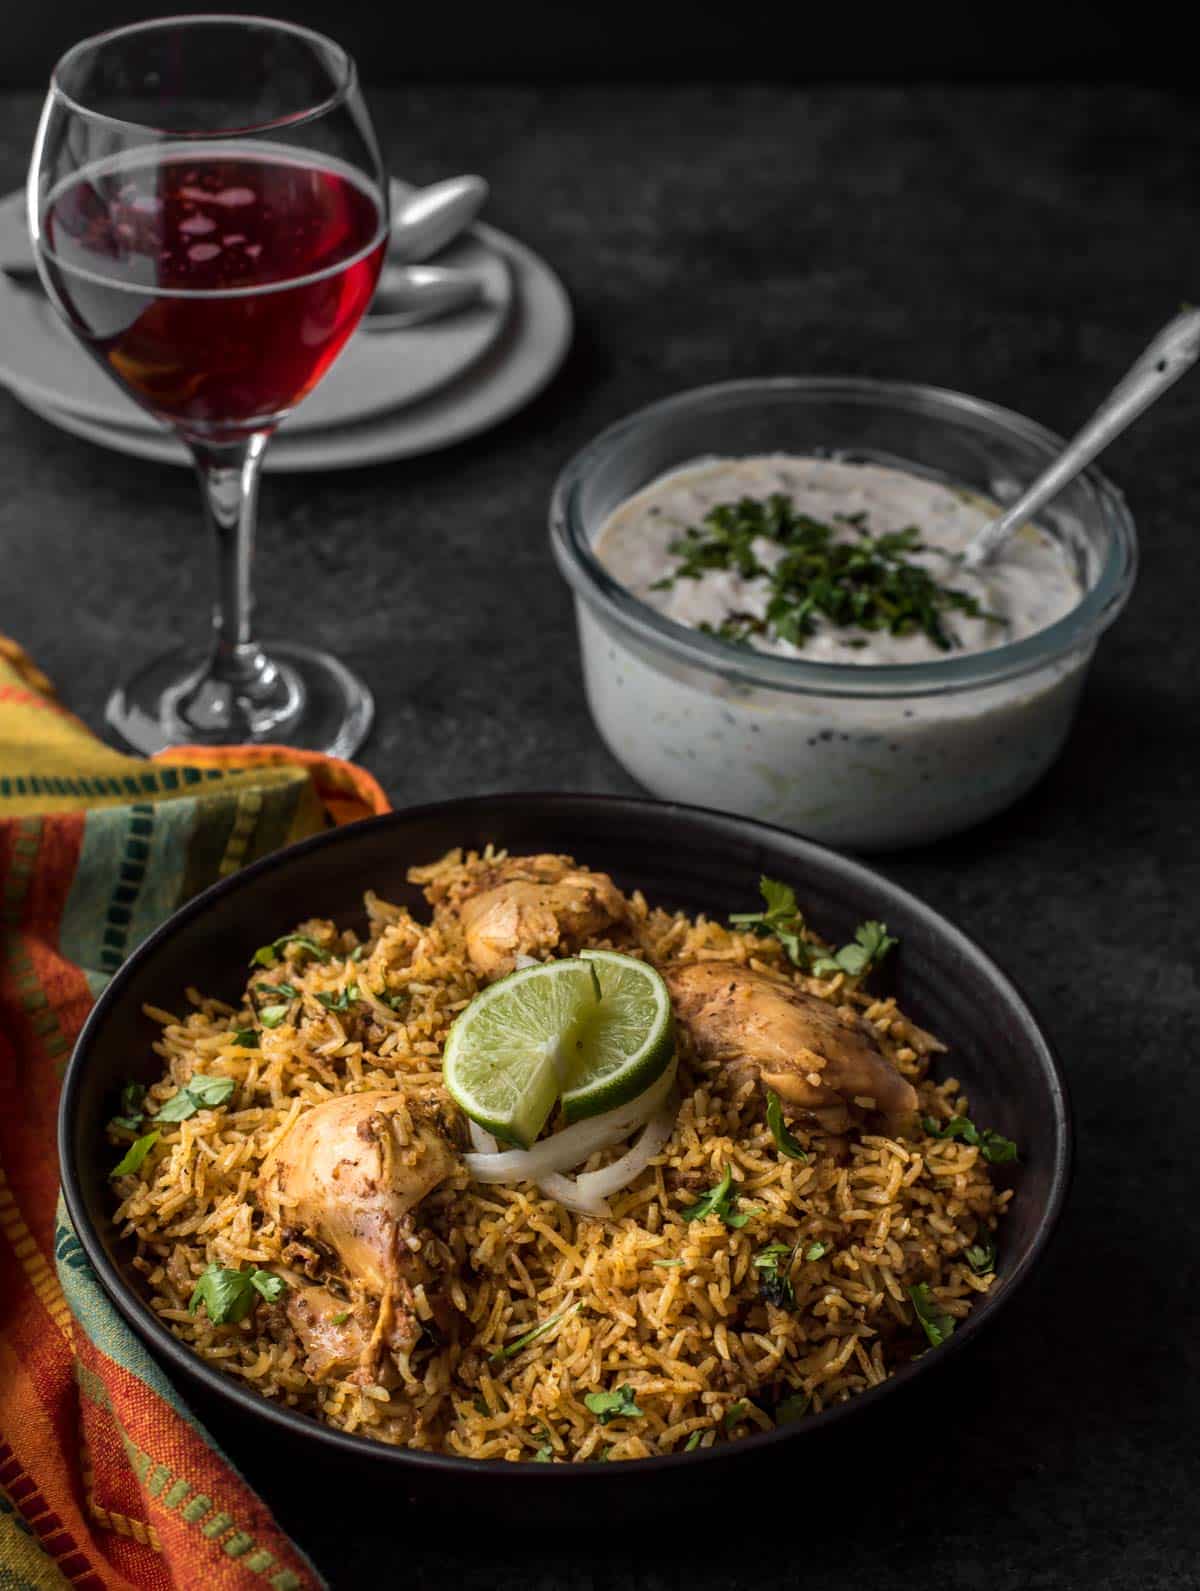 Chettinad Chicken biryani served in a black bowl with a side of raita and red sparkling wine